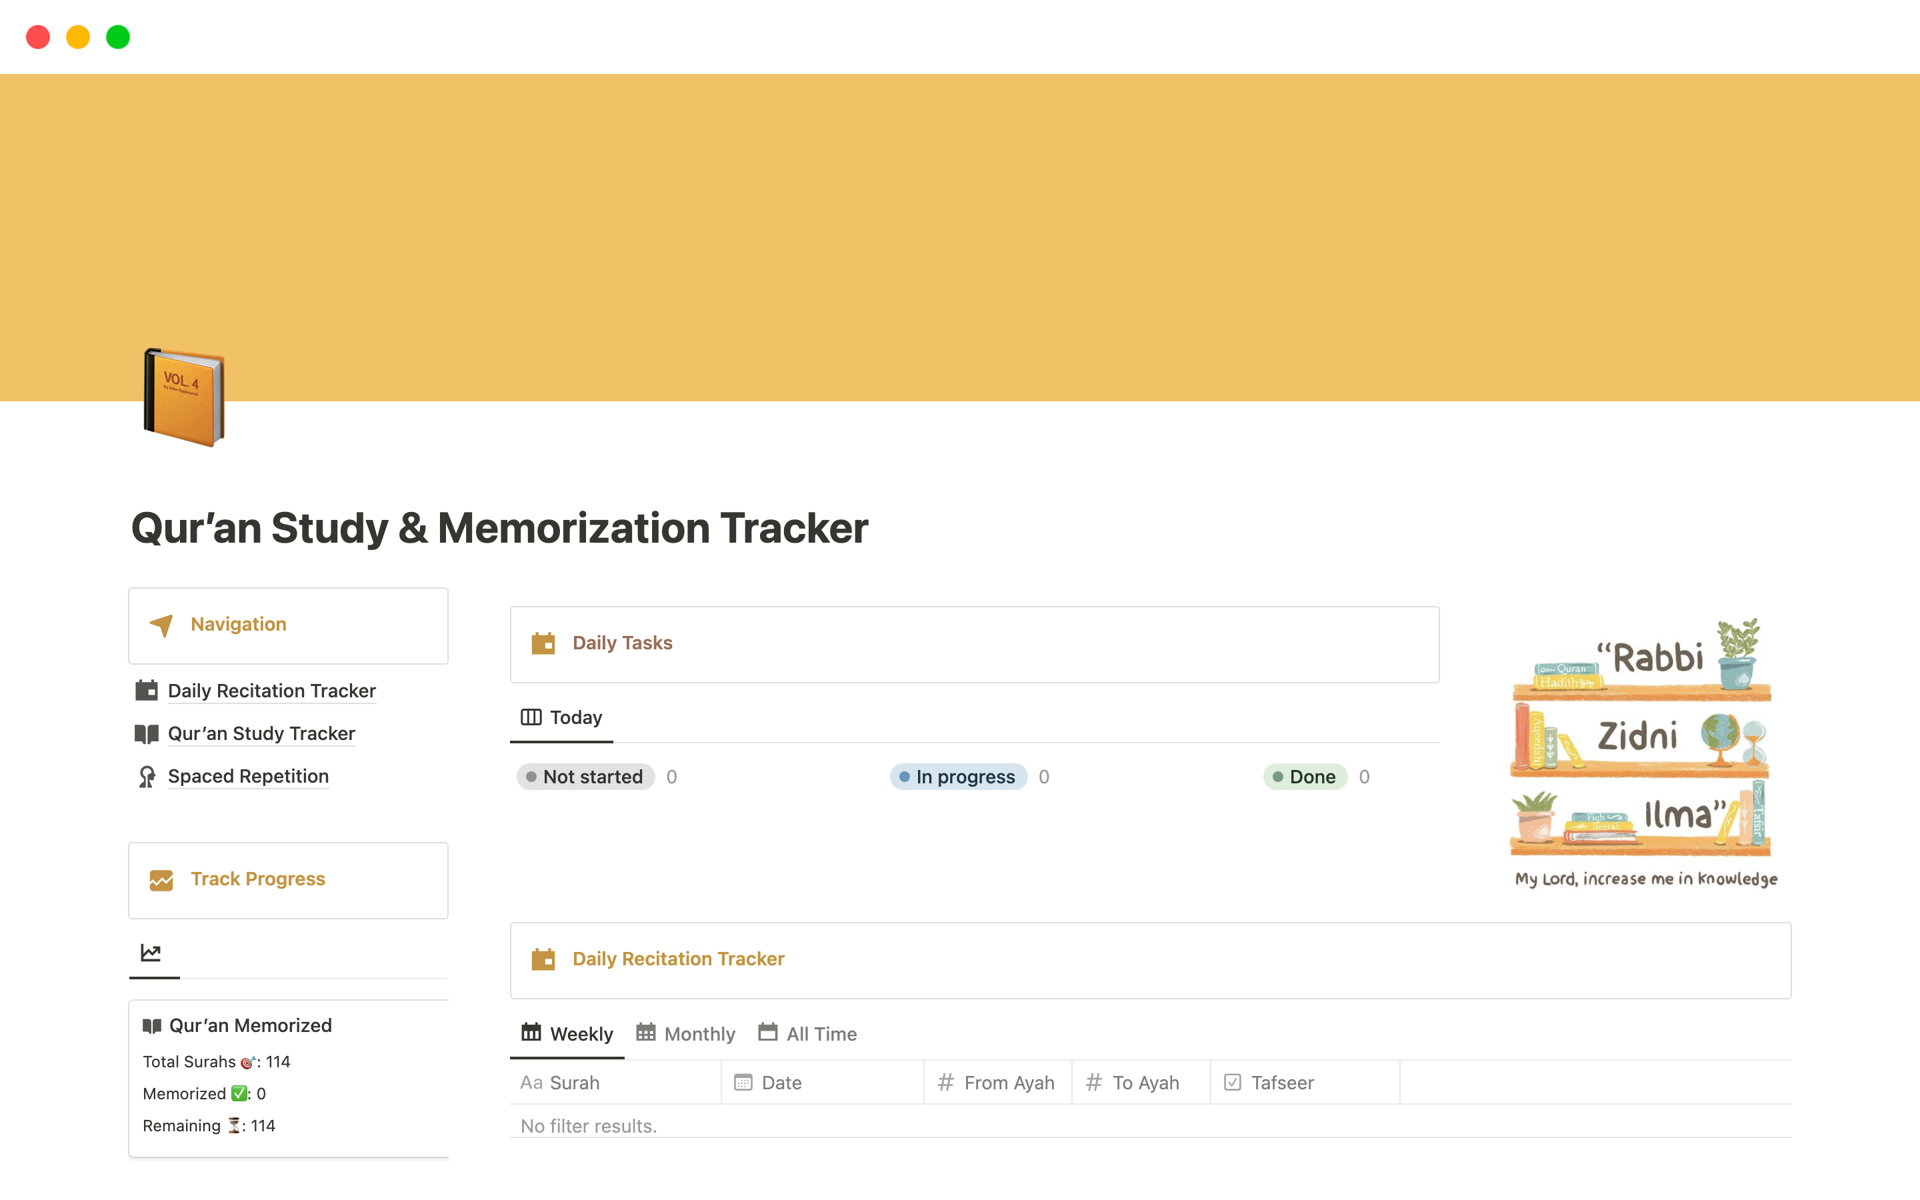 Enhance your Quran memorization journey with the Quran Study & Memorization Tracker template.